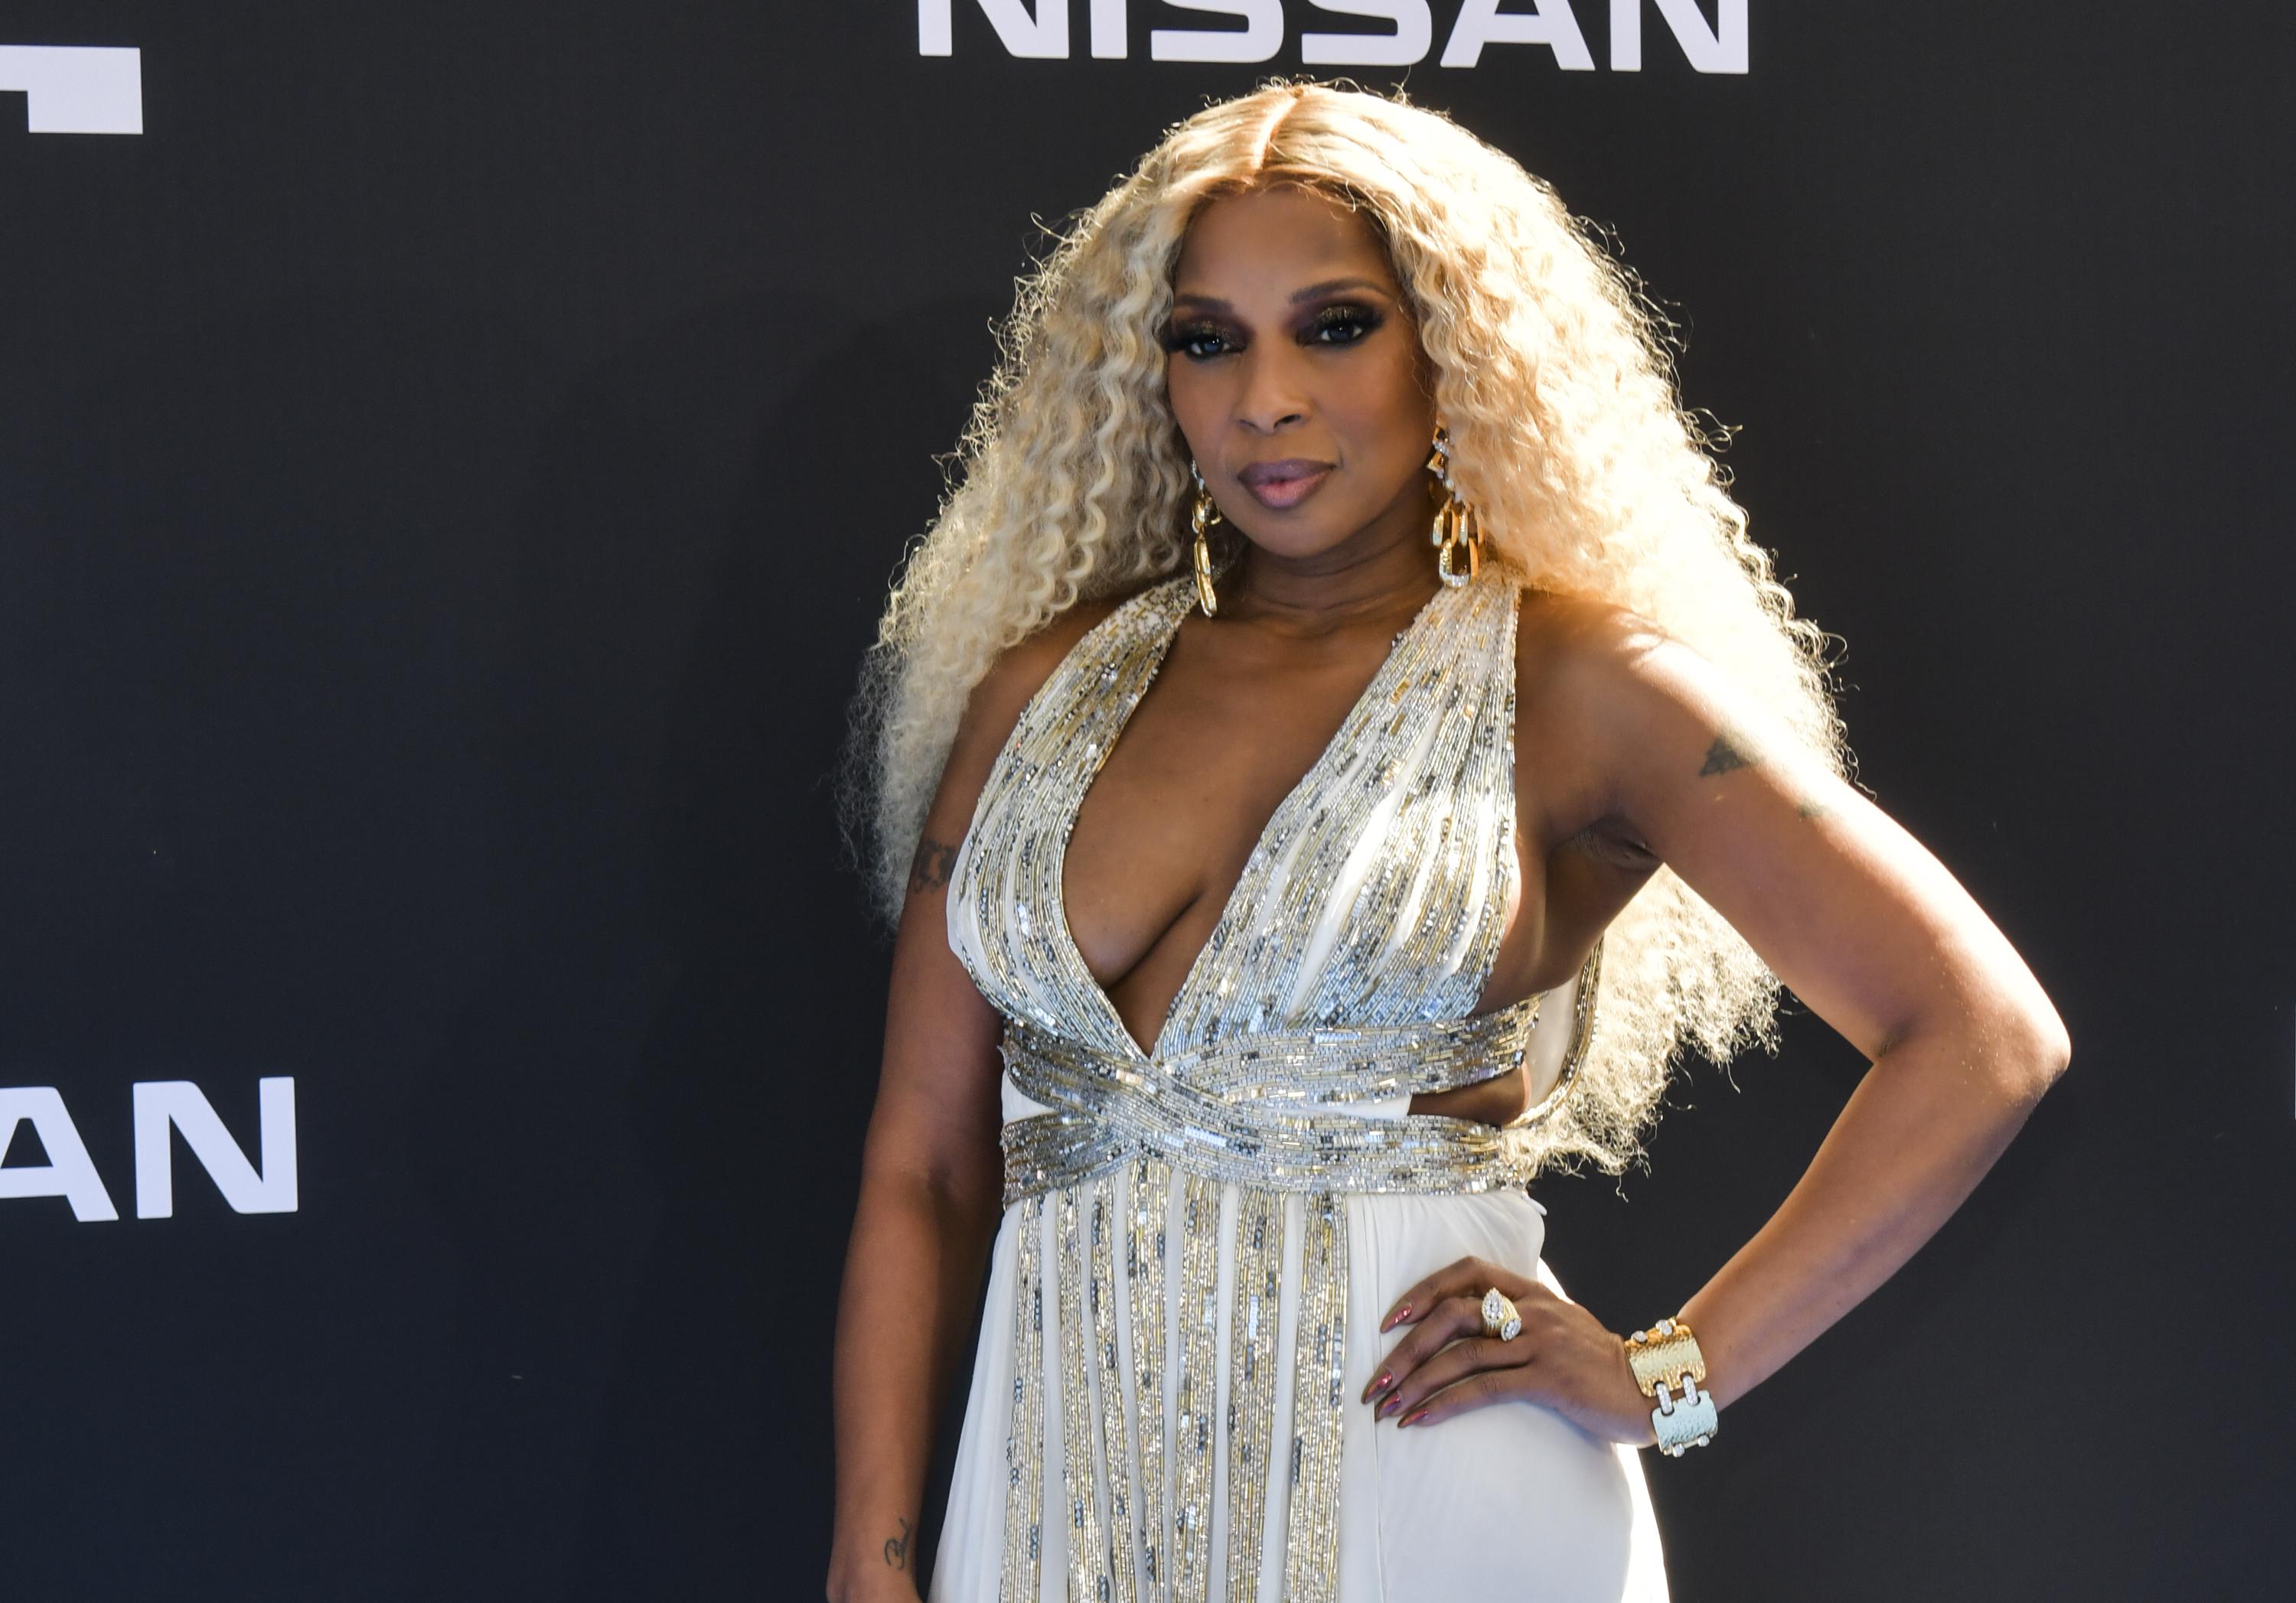 Mary J. Blige on why she says 'good morning, gorgeous' to herself -  xoNecole: Lifestyle, Culture, Love, Wellness